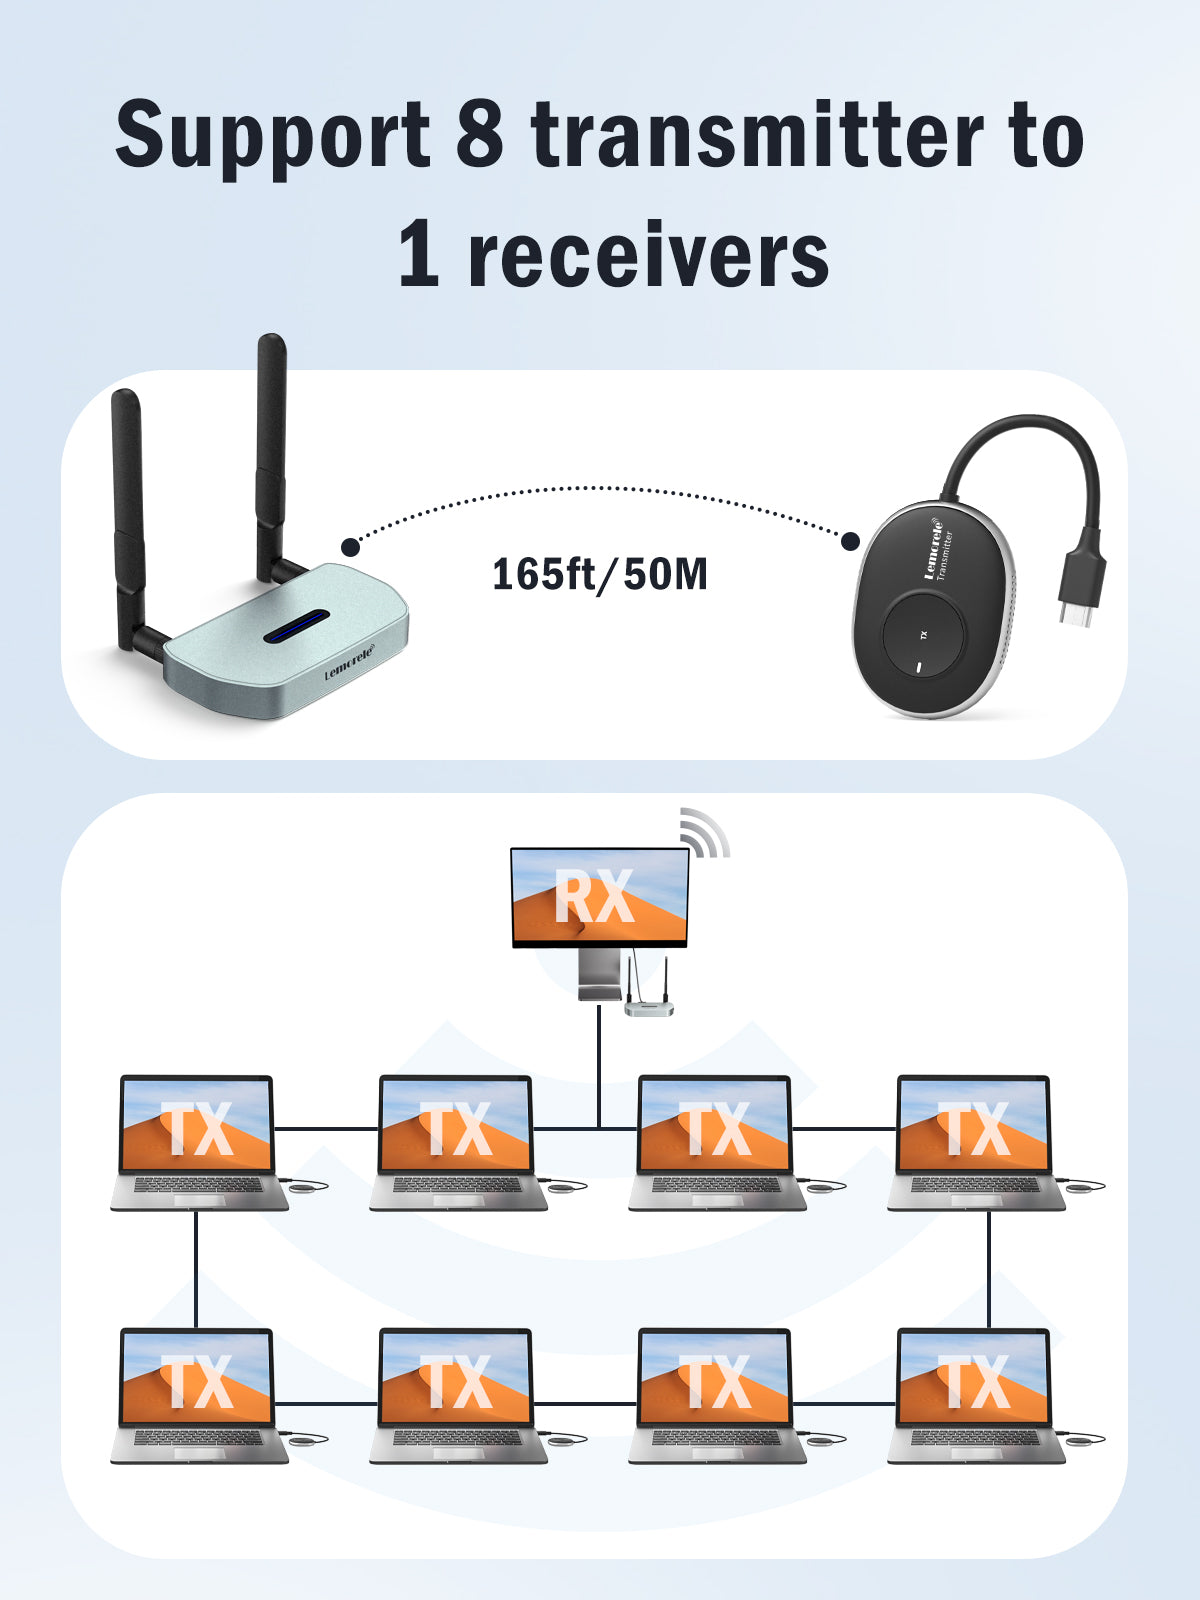 Lemorele HDMI Wireless Extender Streaming Video Kit for Switch,PS4 Laptop to HDTV/Projector/Monitor 【Q5R1】